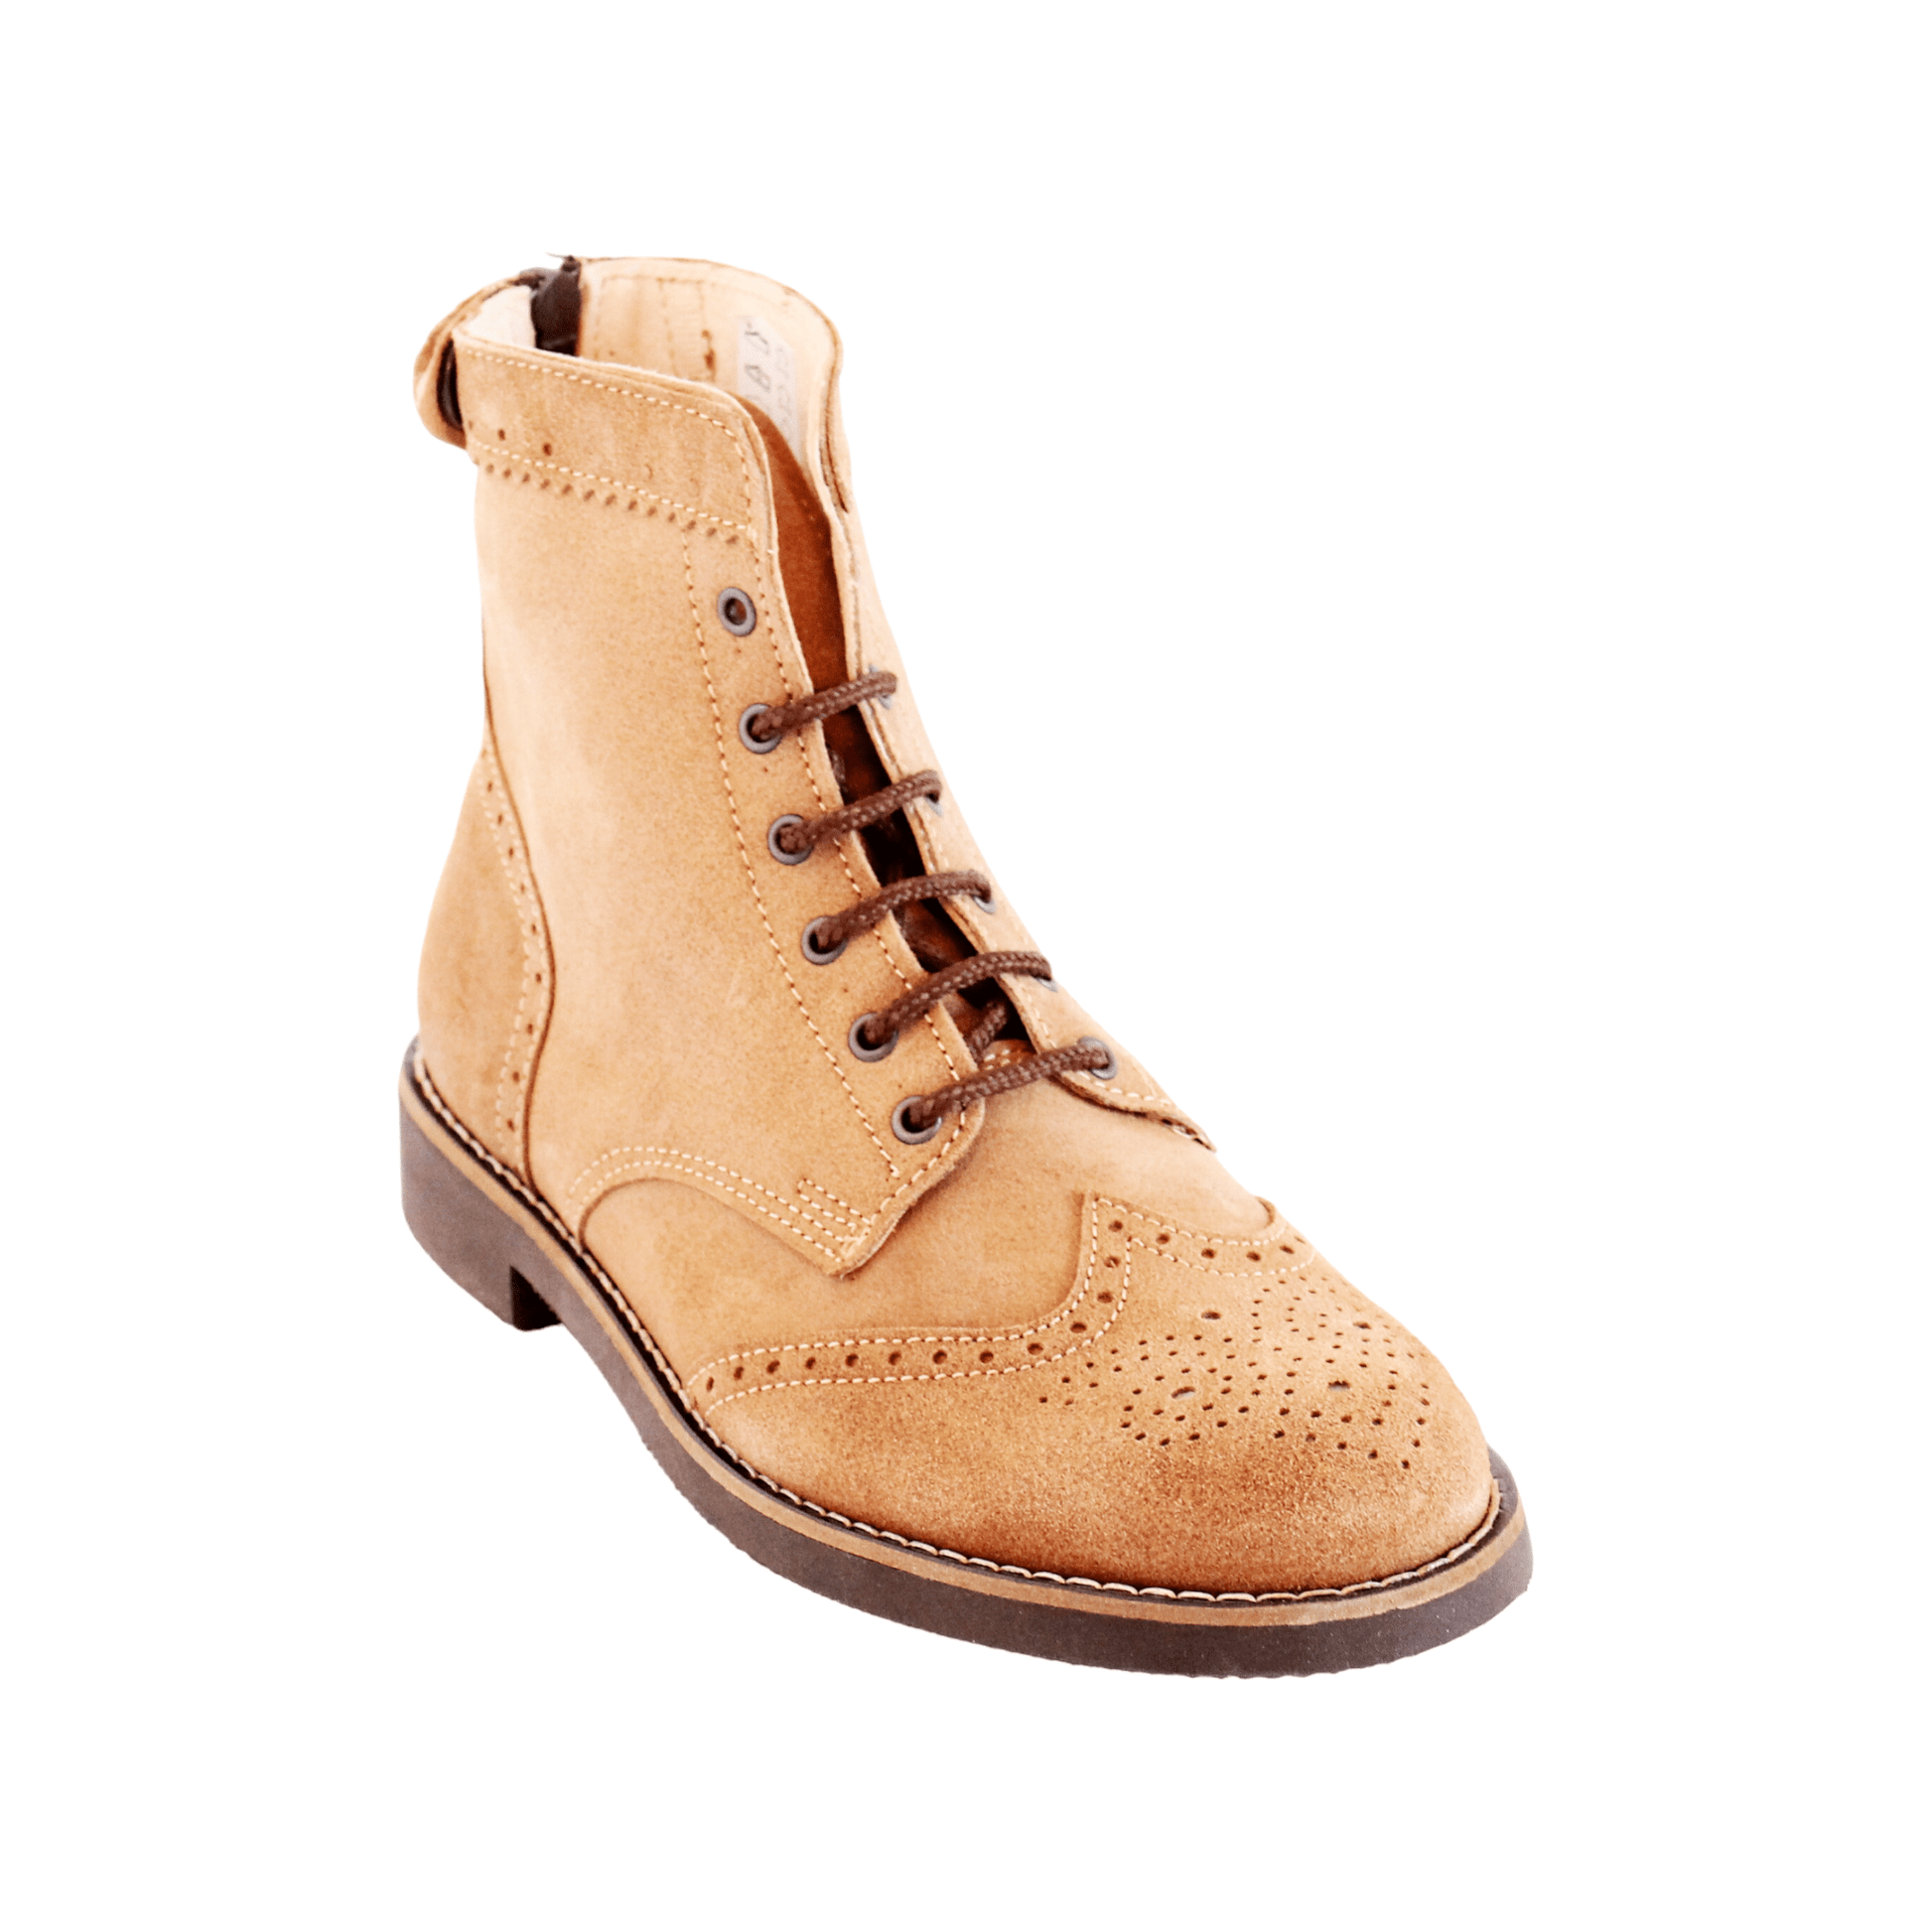 Mondego Women Boots - OldMulla - Boots Store, Handmade By George Family